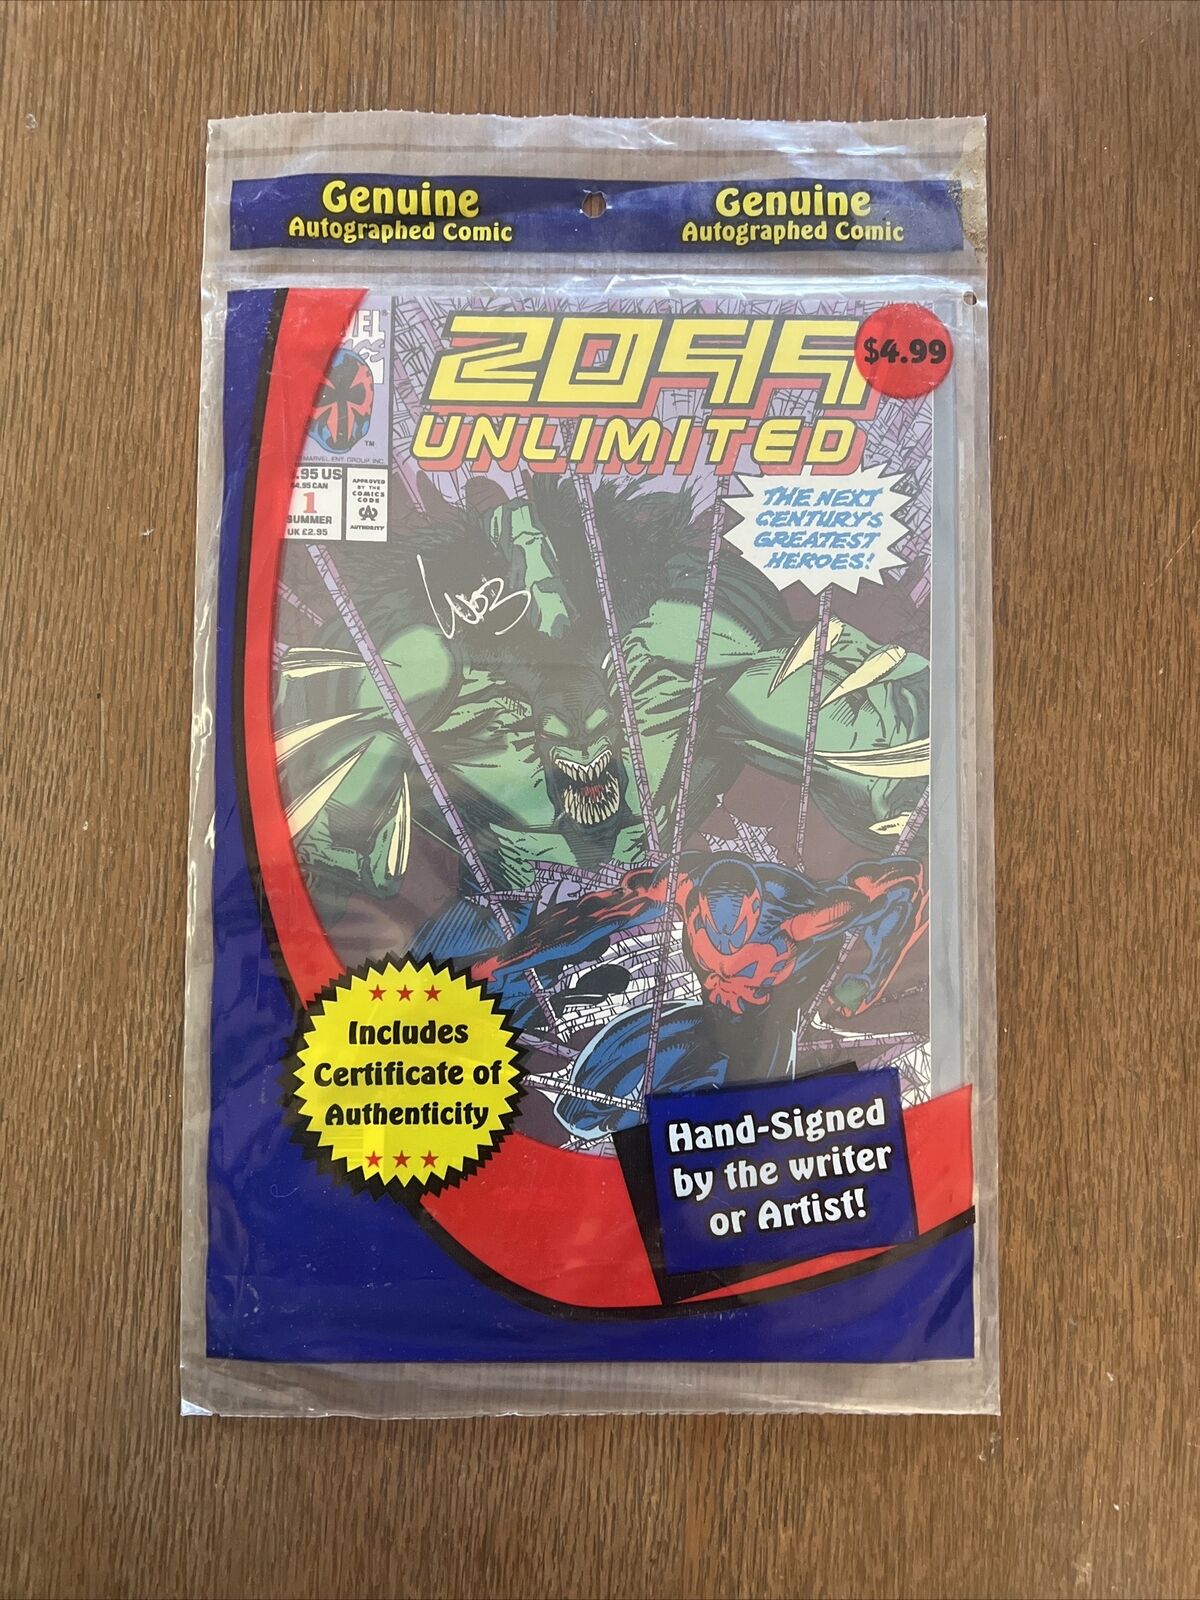 2099 Unlimited Marvel, Signed By Chris Wozniak w/ COA, in Sealed Bag & Protector